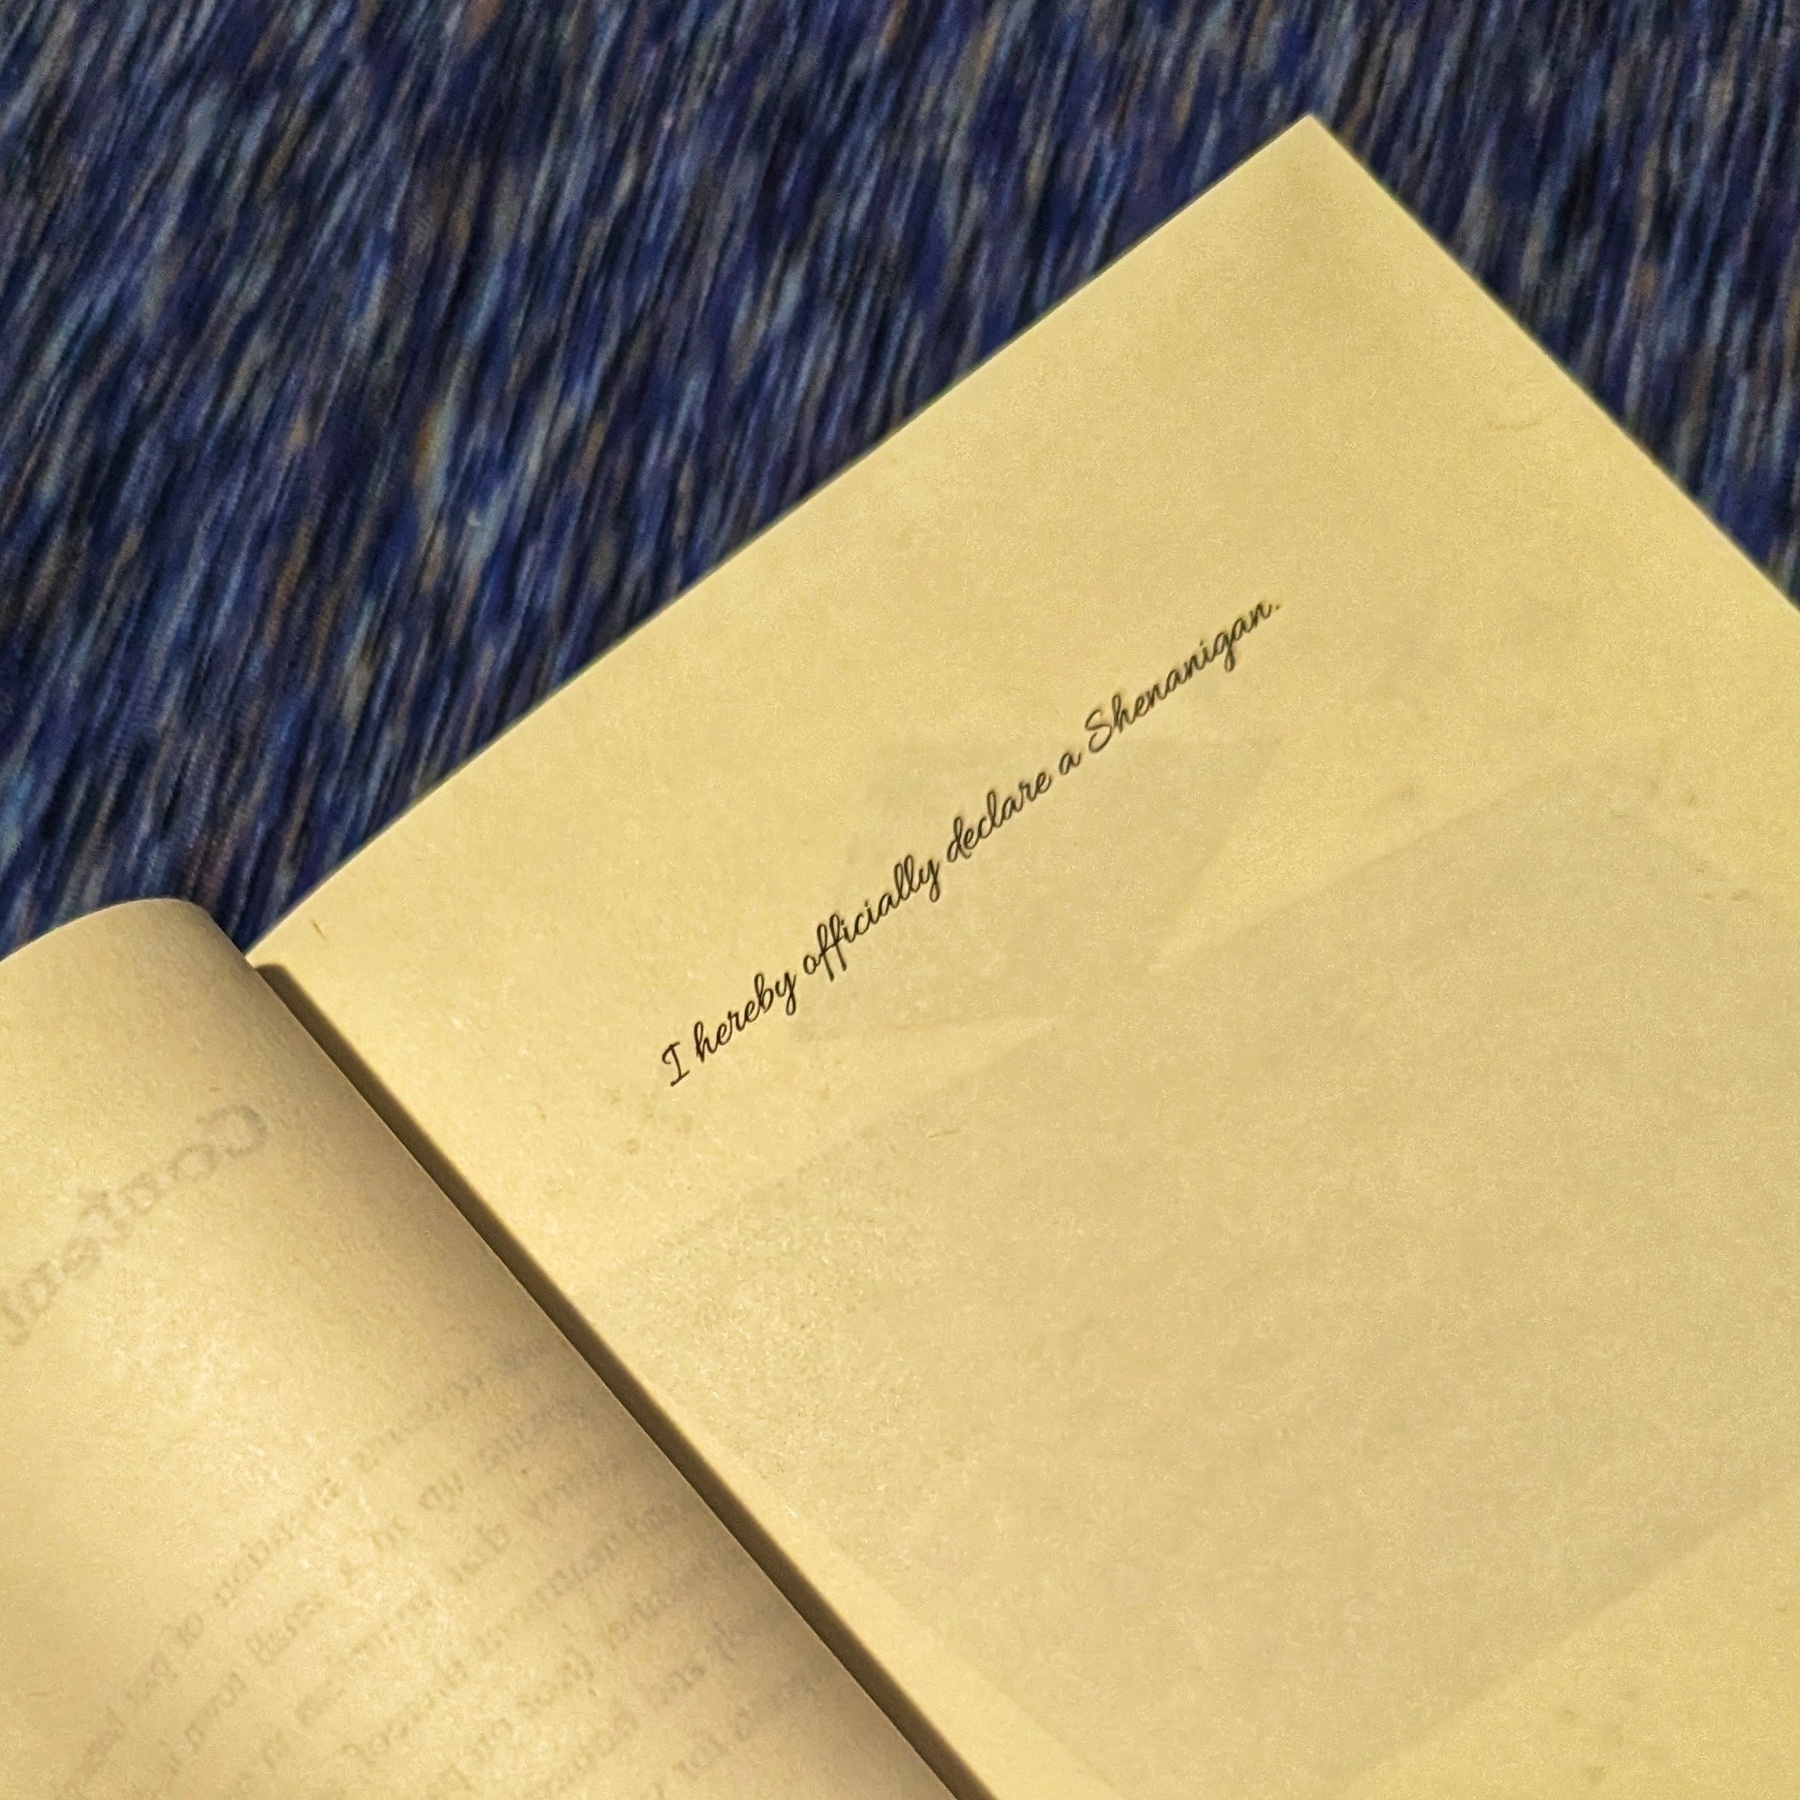 A close-up view of an open book with an inscription on the blank page in a handwriting font. The inscription reads: I hereby officially declare a Shenanigan.